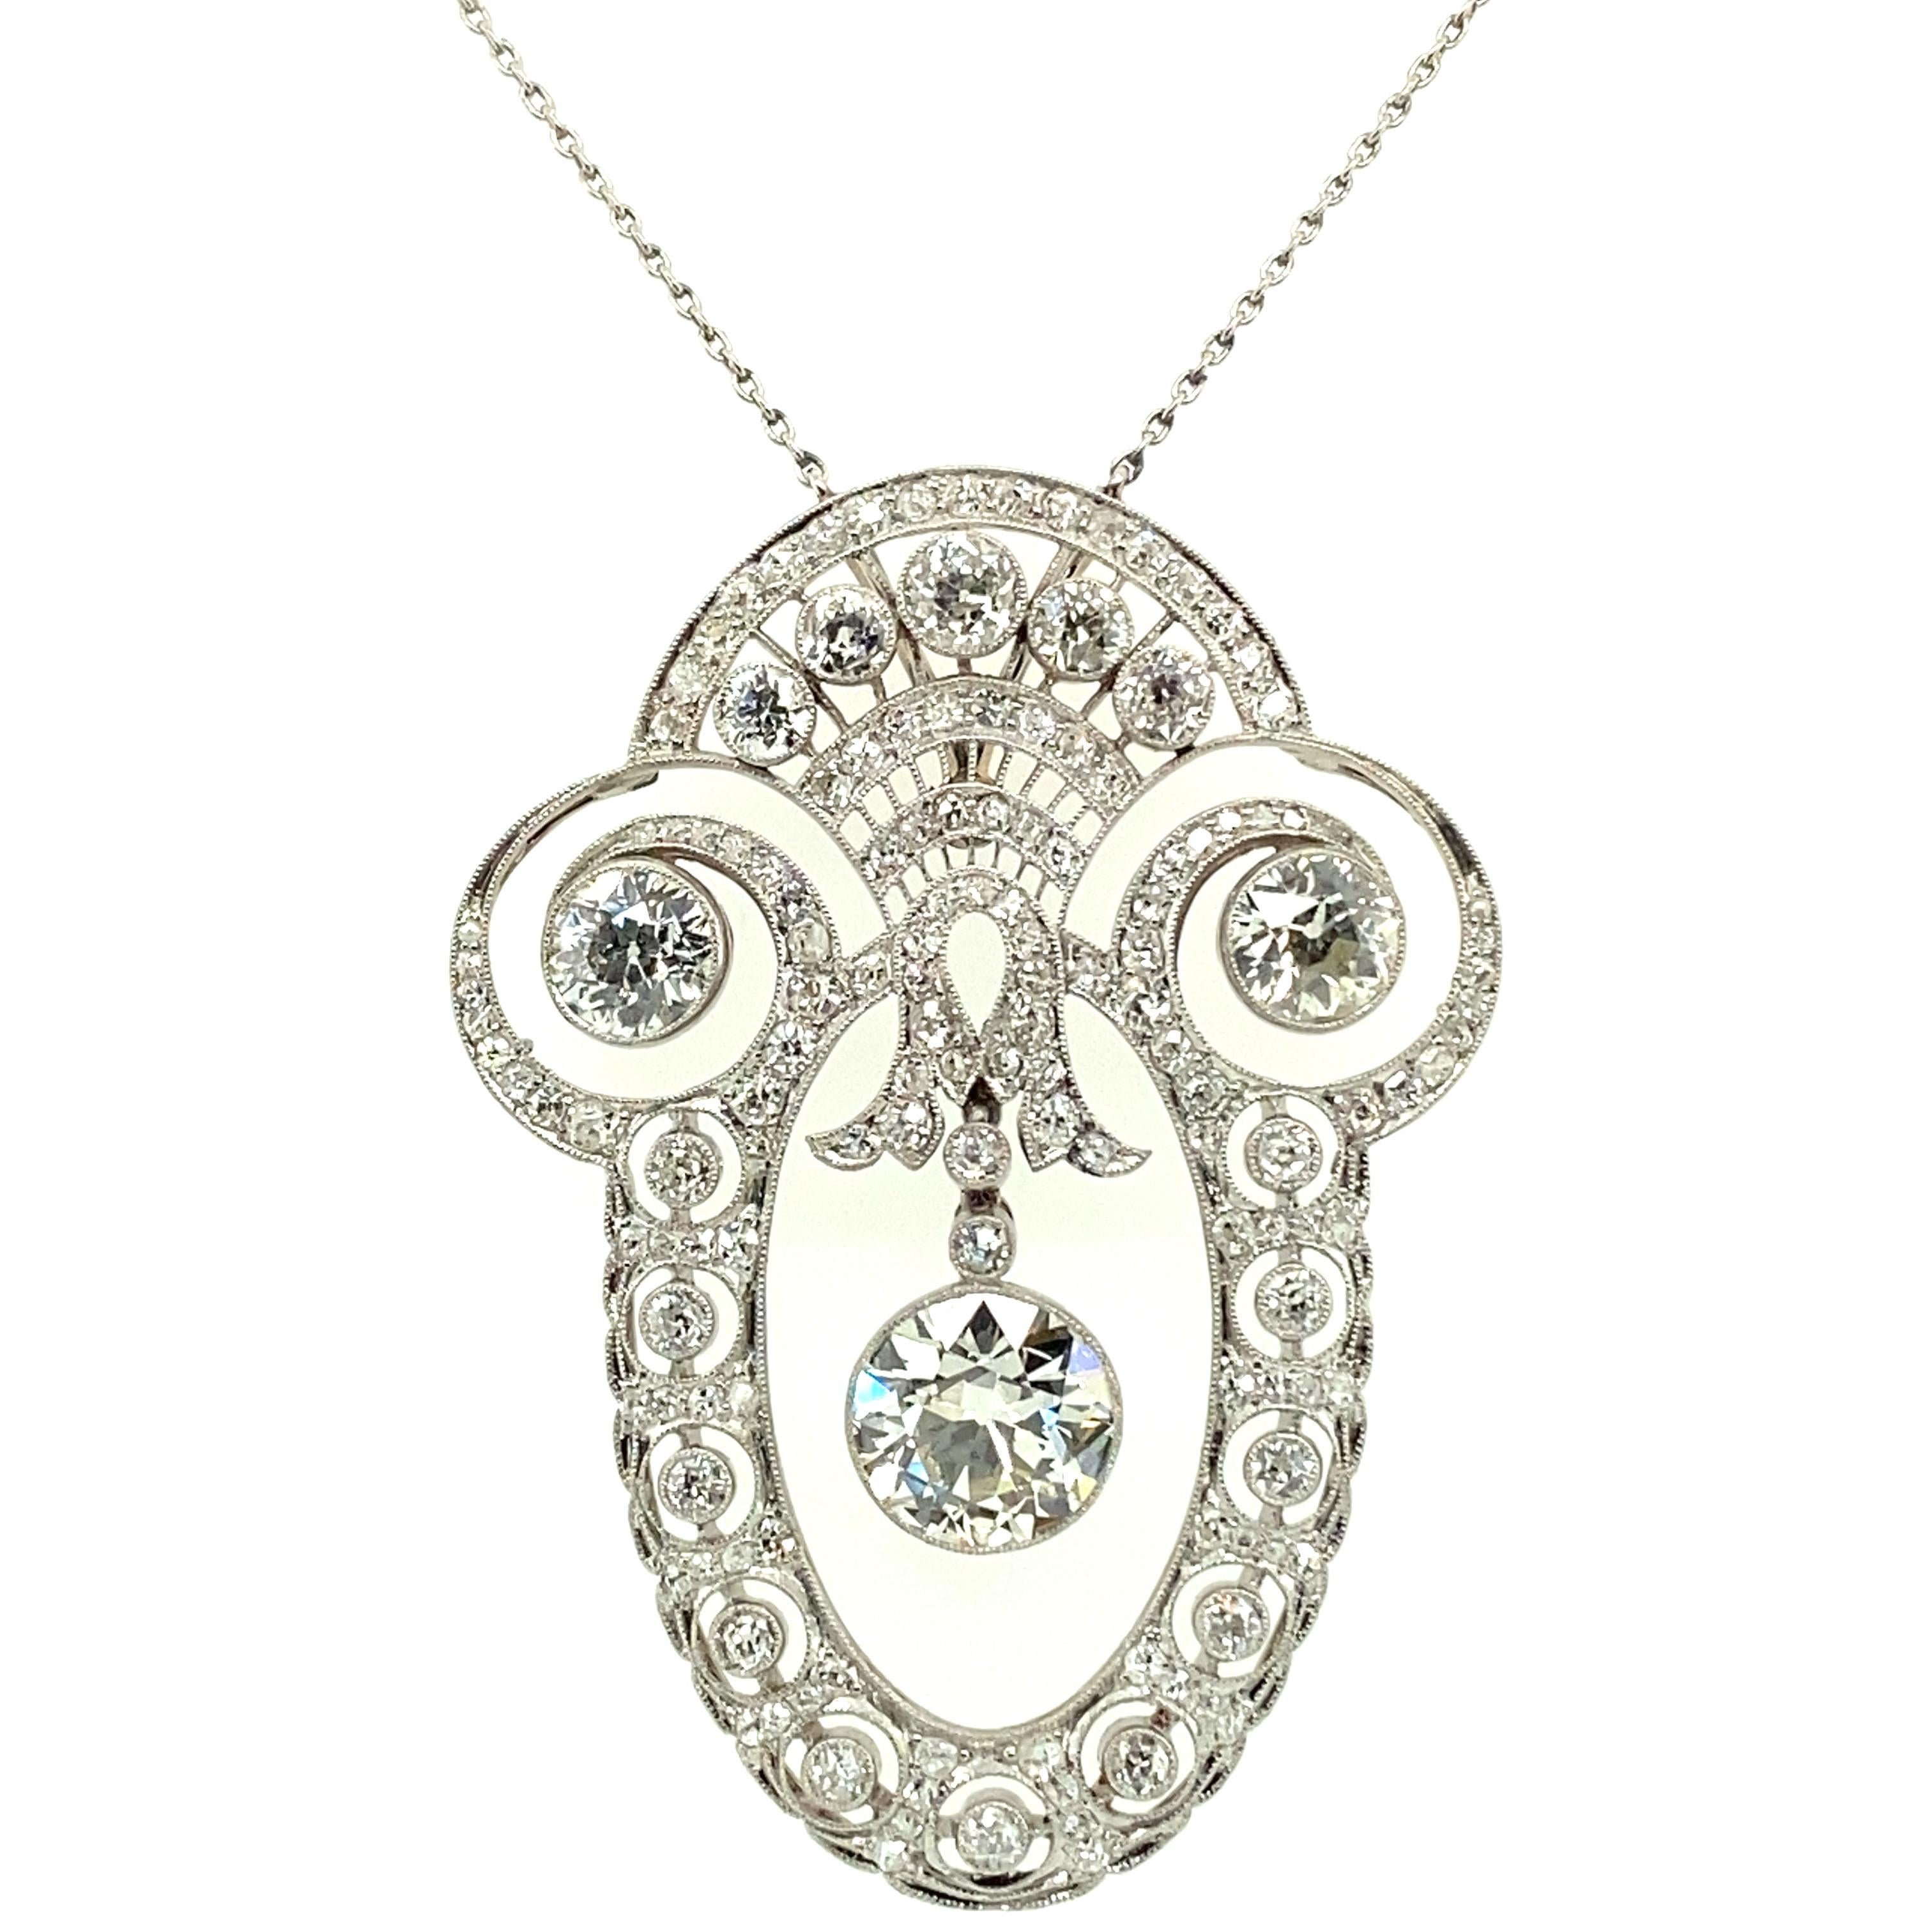 Gorgeous Edwardian Diamond Necklace in Platinum 950 In Good Condition For Sale In Lucerne, CH